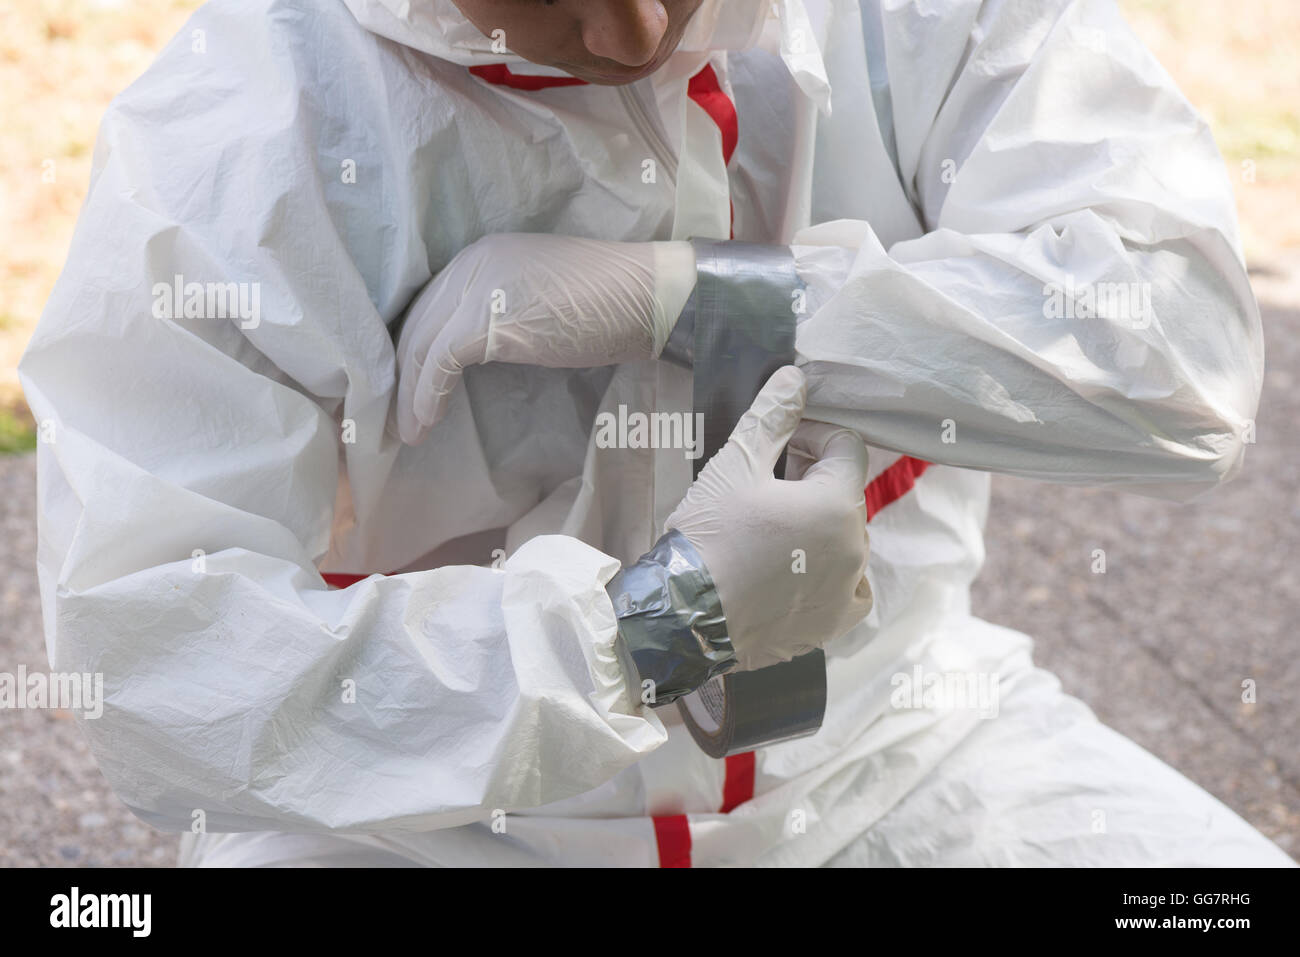 A house painter secures the sleeves of his hazmat suit preparing to safely remove lead paint. Stock Photo